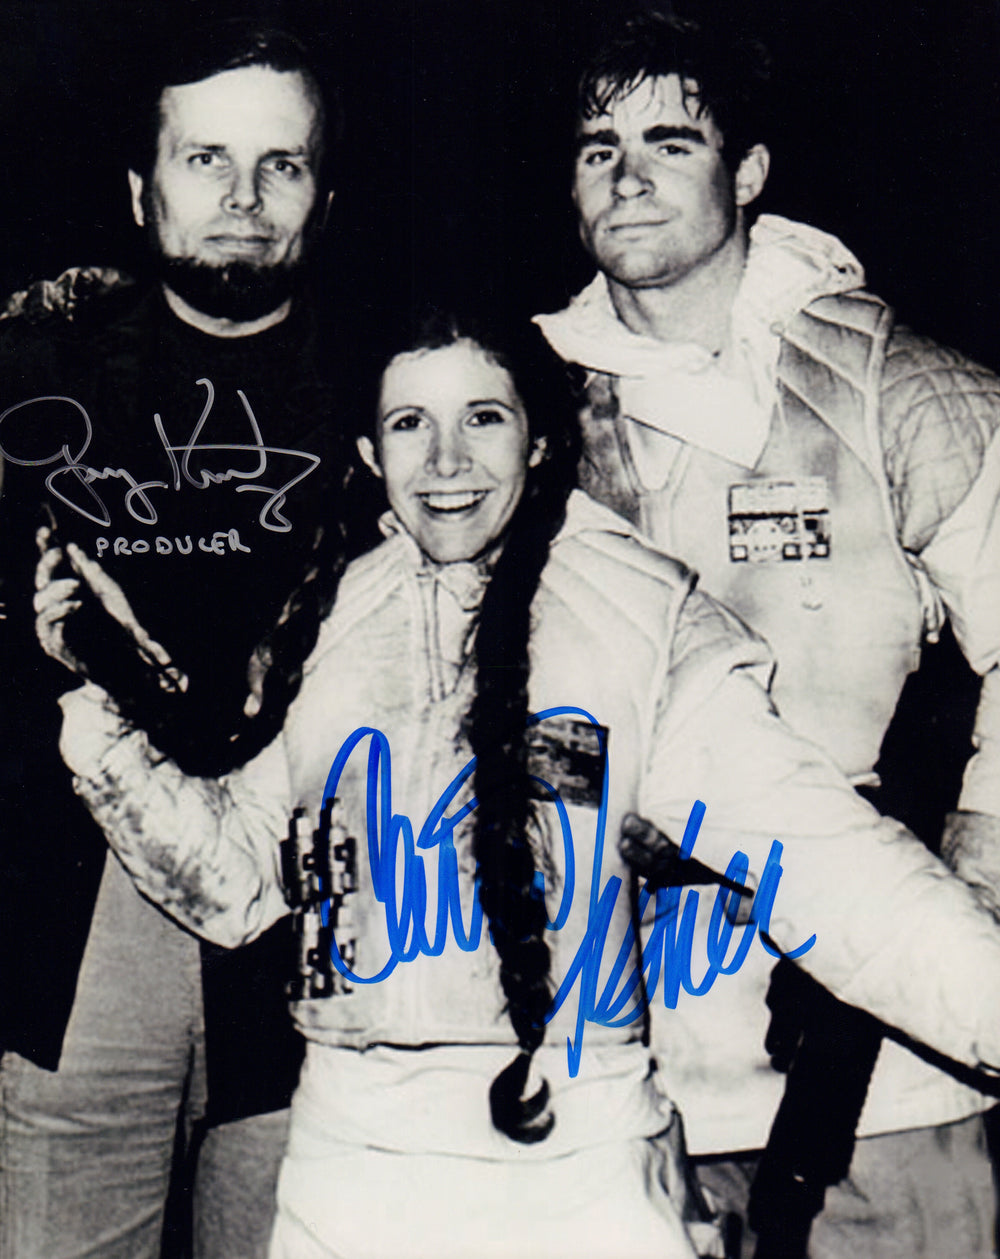 Carrie Fisher as Princess Leia & Gary Kurtz Producer of Star Wars: The Empire Strikes Back Signed 8x10 Photo